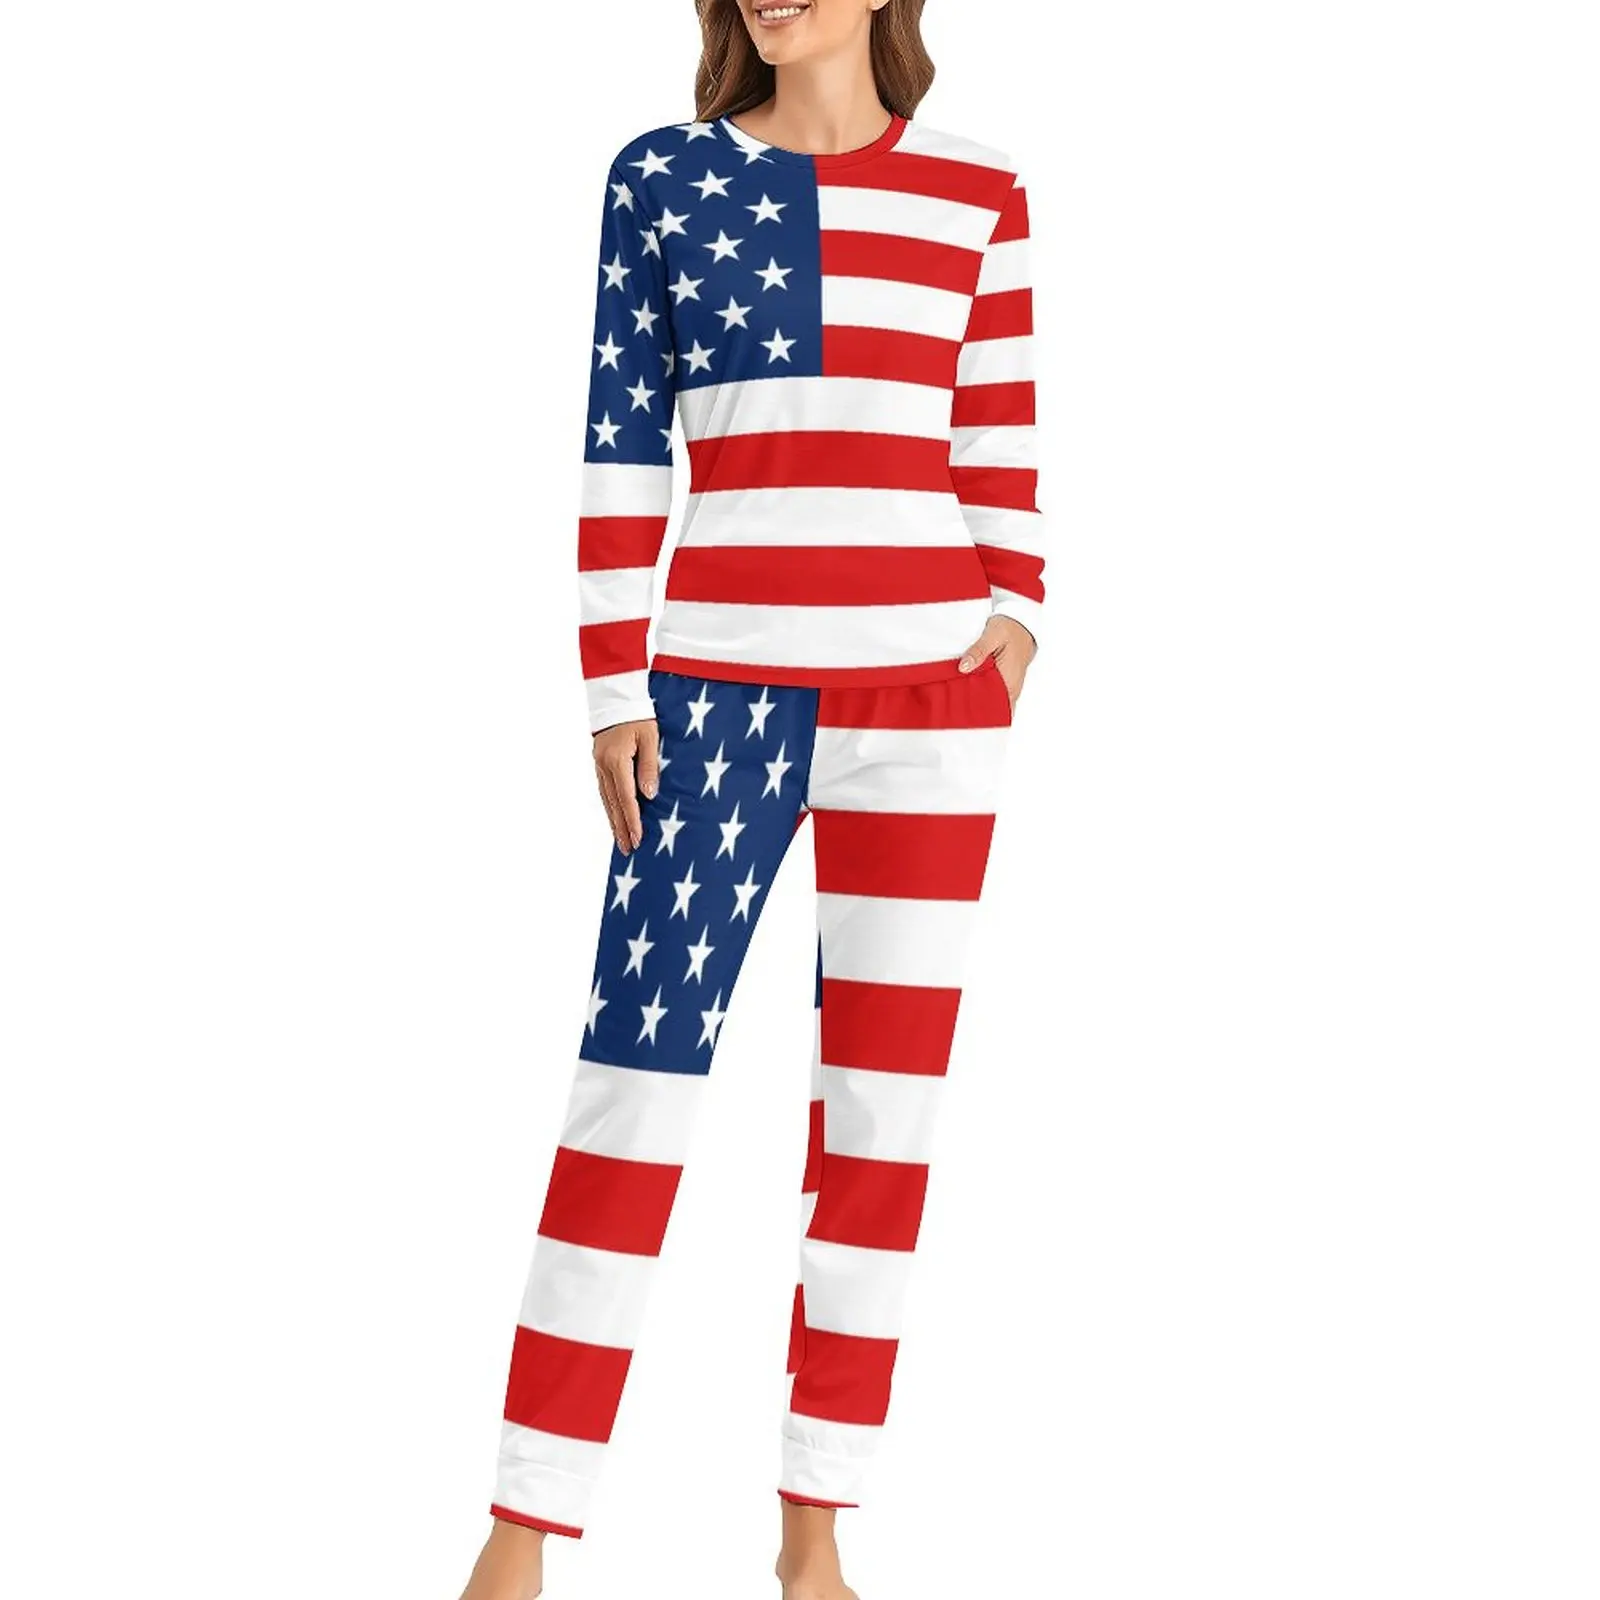 

American Flag Pajamas Woman 4th of July Blue Red Stripe Retro Nightwear Two Piece Aesthetic Pajamas Set Oversized Home Suit Gift